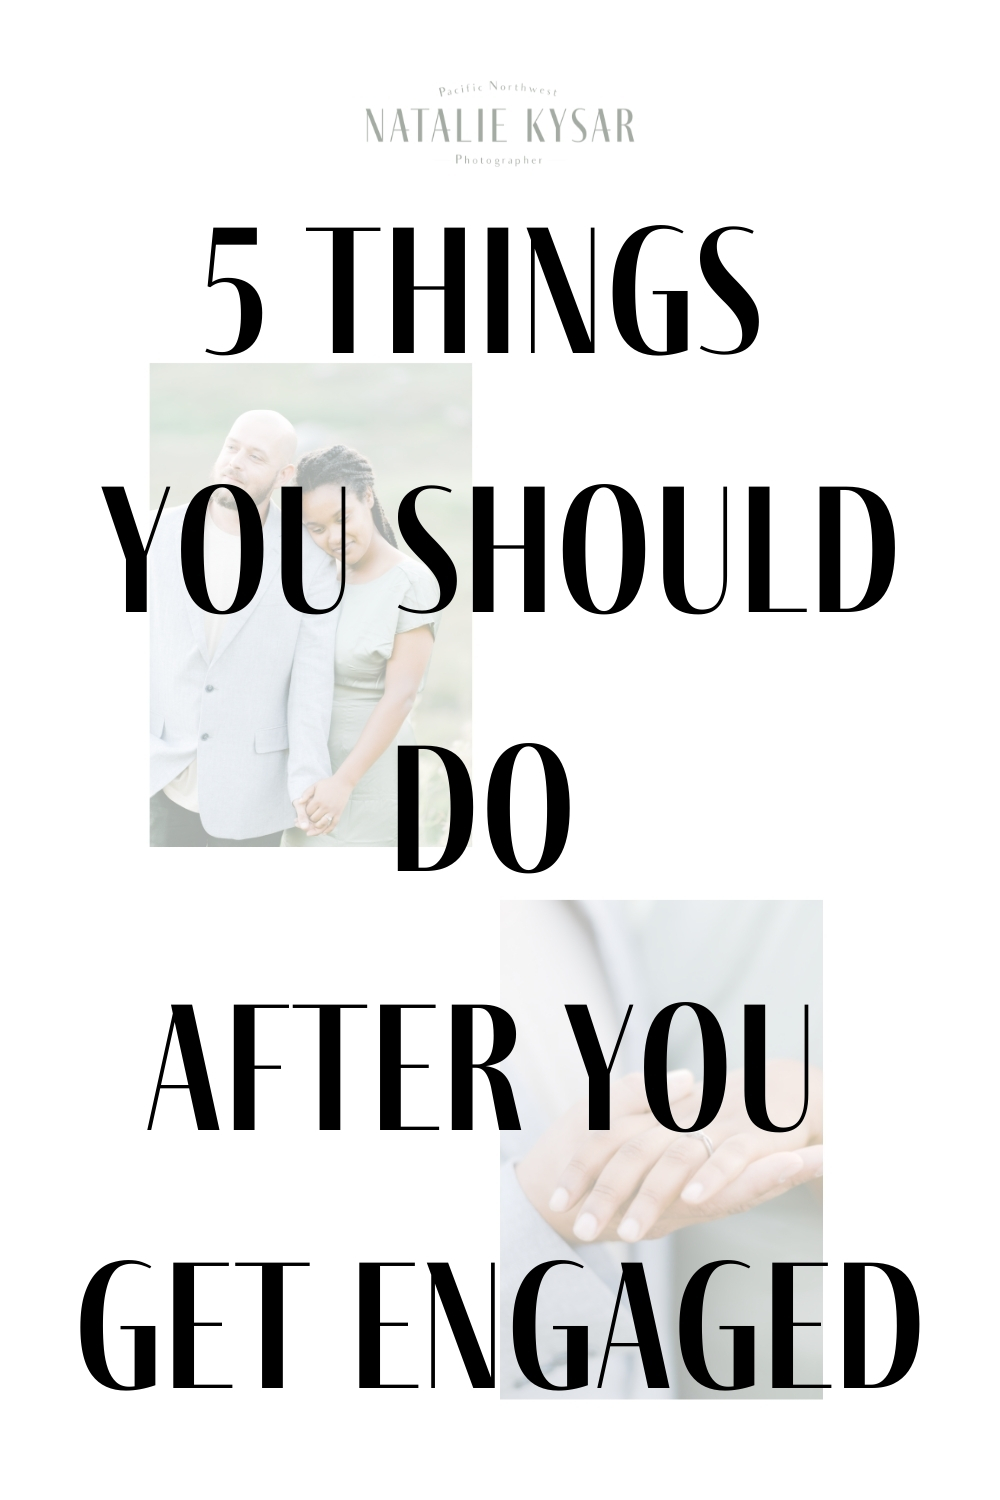 5 things you should do after you get engaged